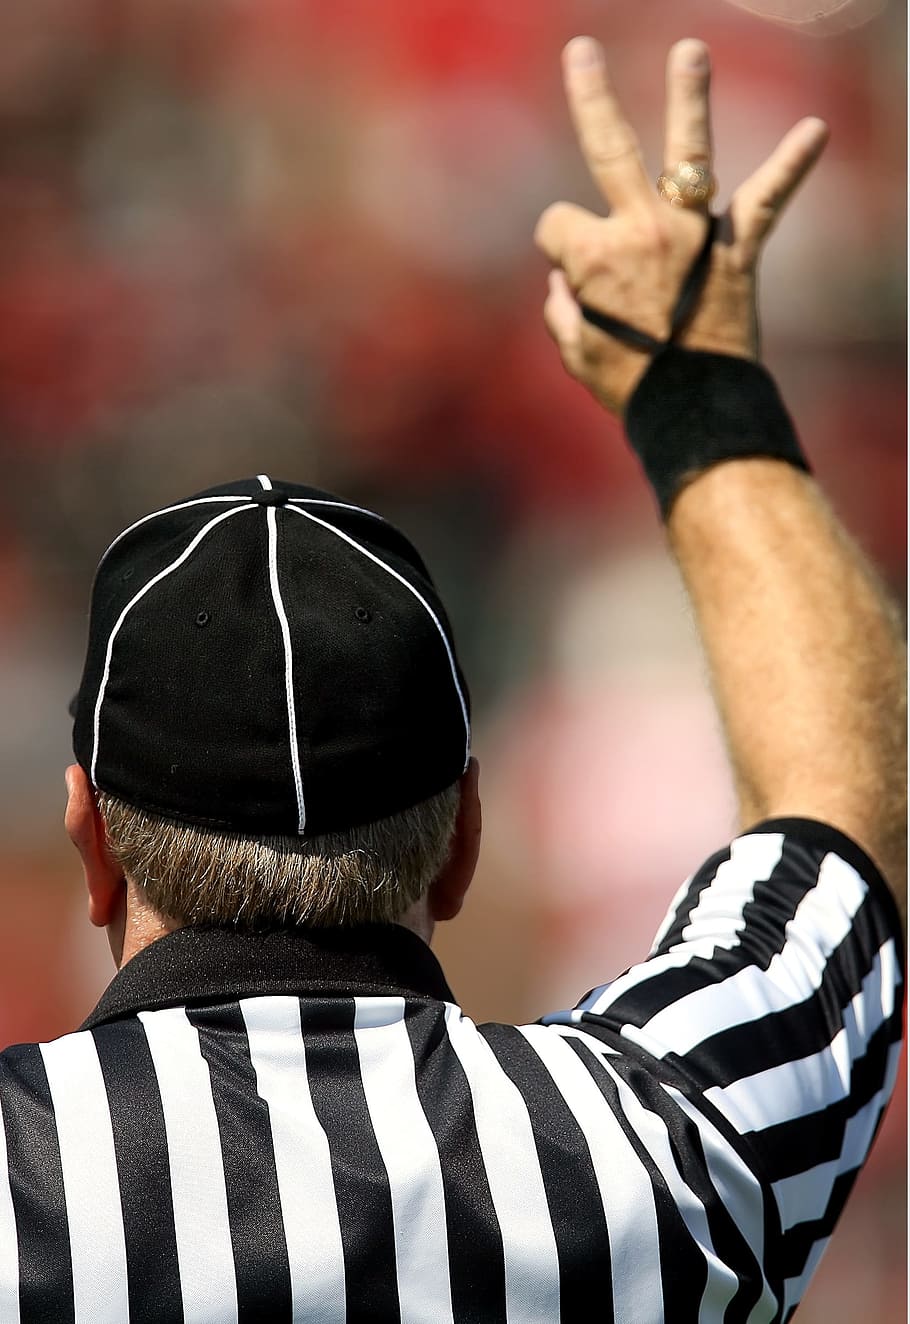 american football official, referee, football referee, competition, game, stripes, zebra, sport, official, third down